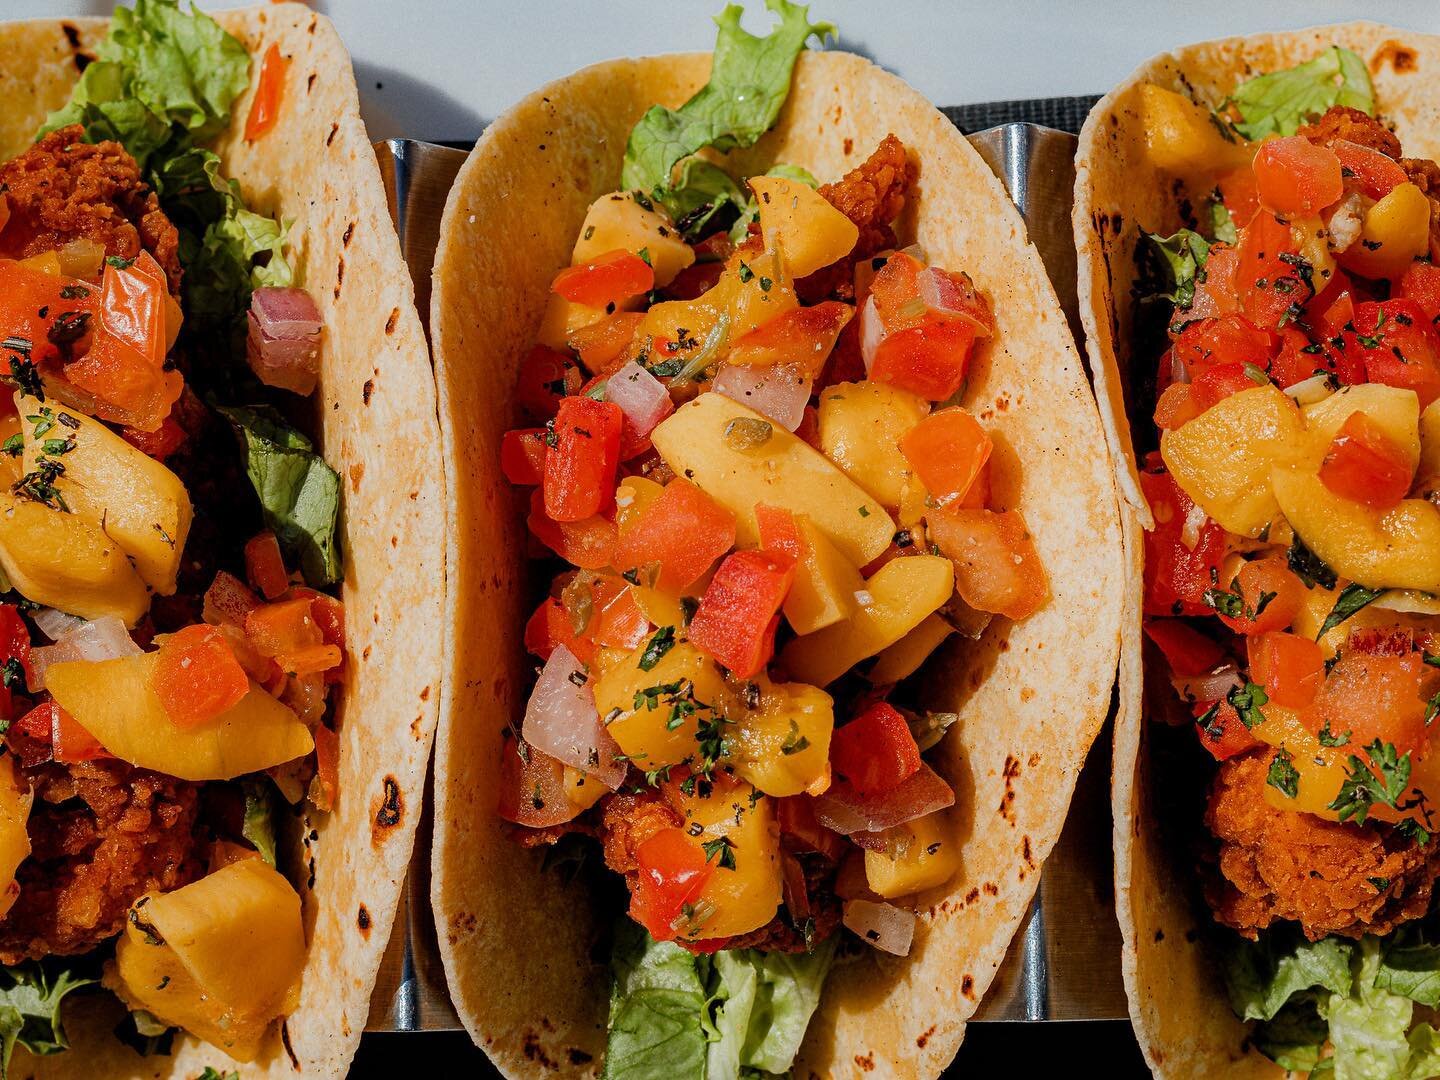 Looking for a delicious and relaxing lunch? Look no further than Barney's! Enjoy our mouth-watering chicken tacos inside or on our patio (if the weather co-operates!) 

You know where to find us!